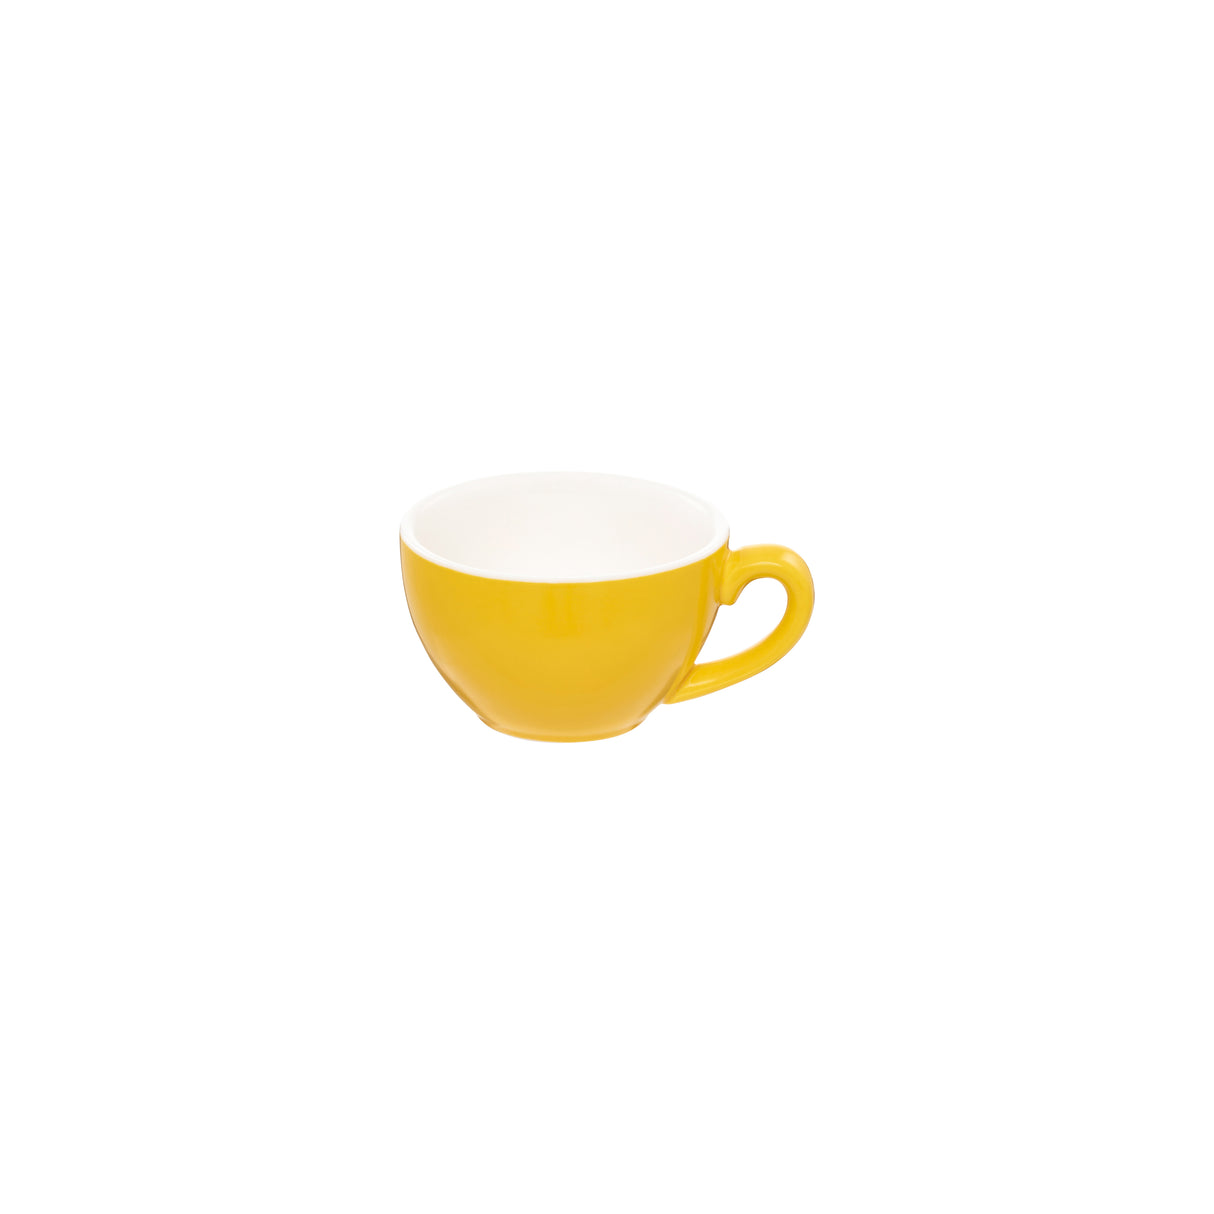 Cappuccino cup - Maize, 200ml, Intorno: Pack of 6